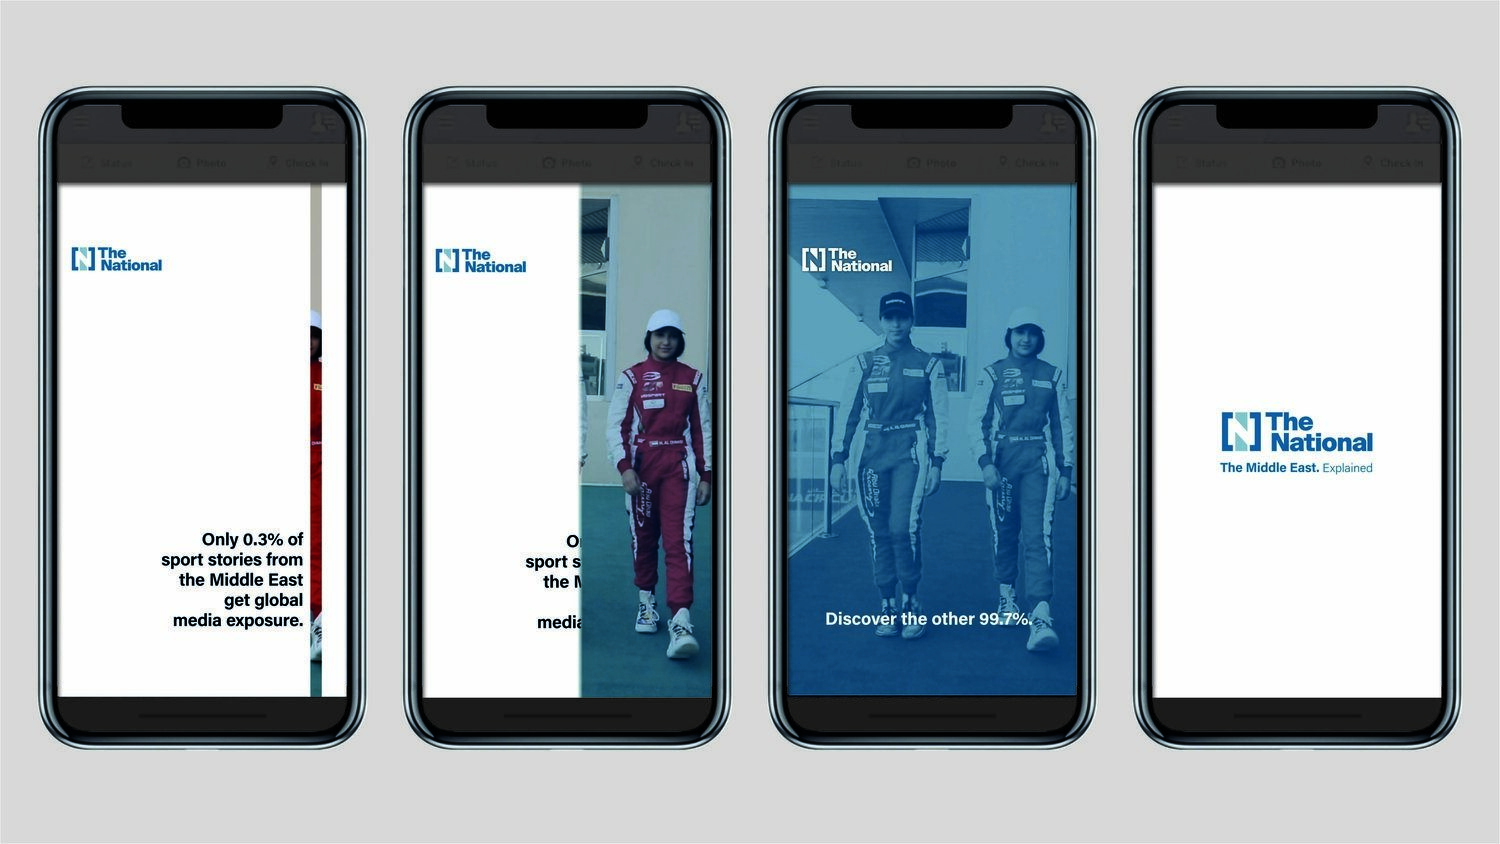 Screenshots of the national campaign on a mobile phone